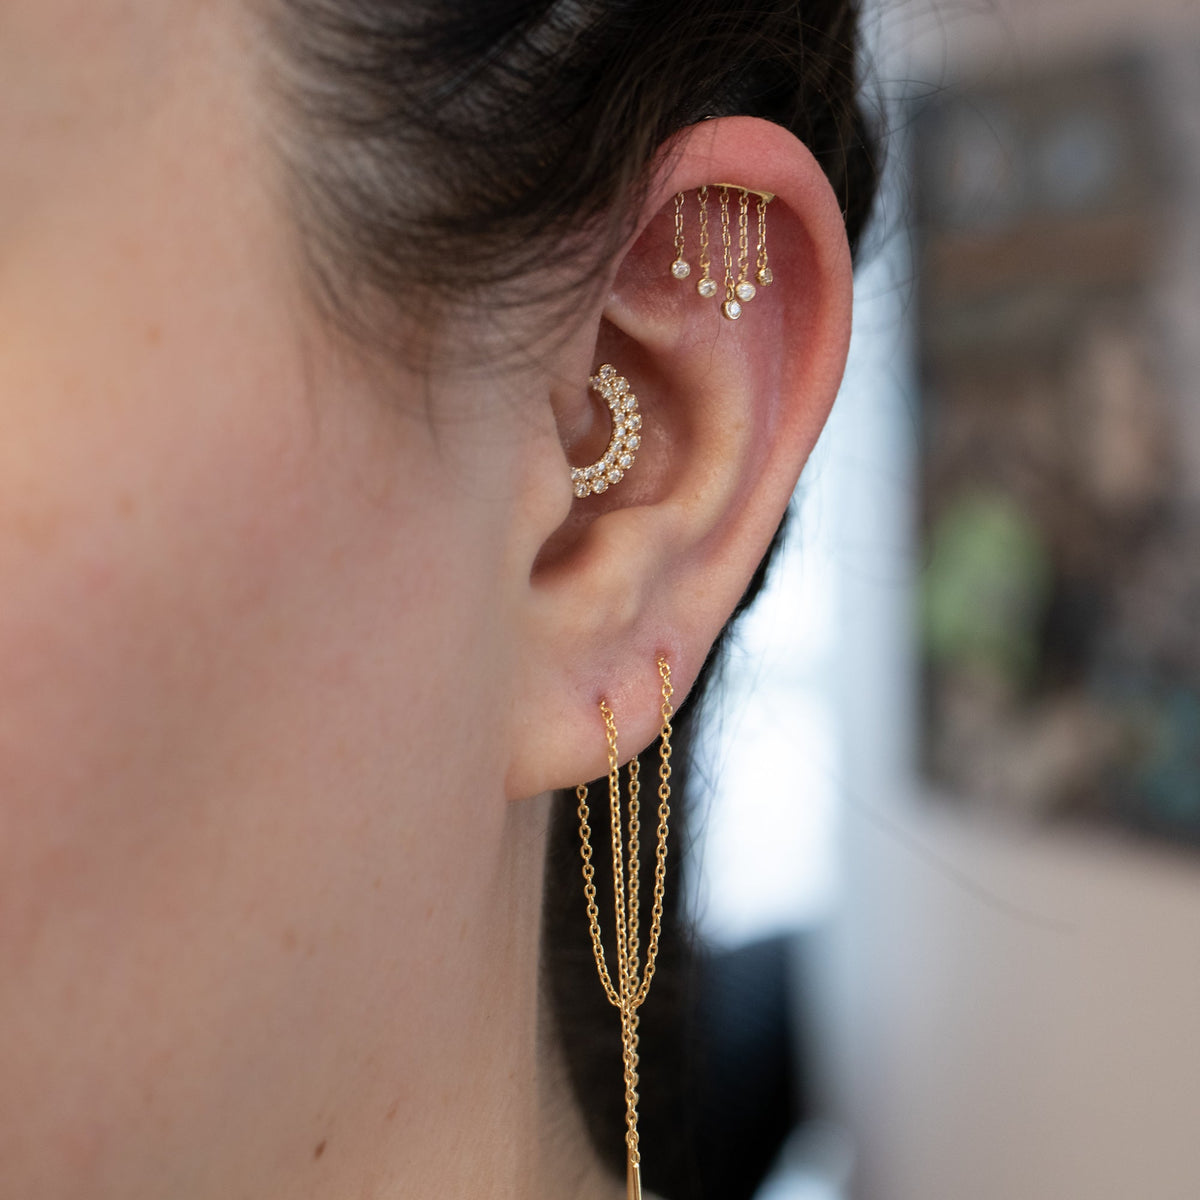 Yellow Gold Studs Crystal Chandelier Floating Helix Earring The Curated Lobe14k gold14k gold topbestseller